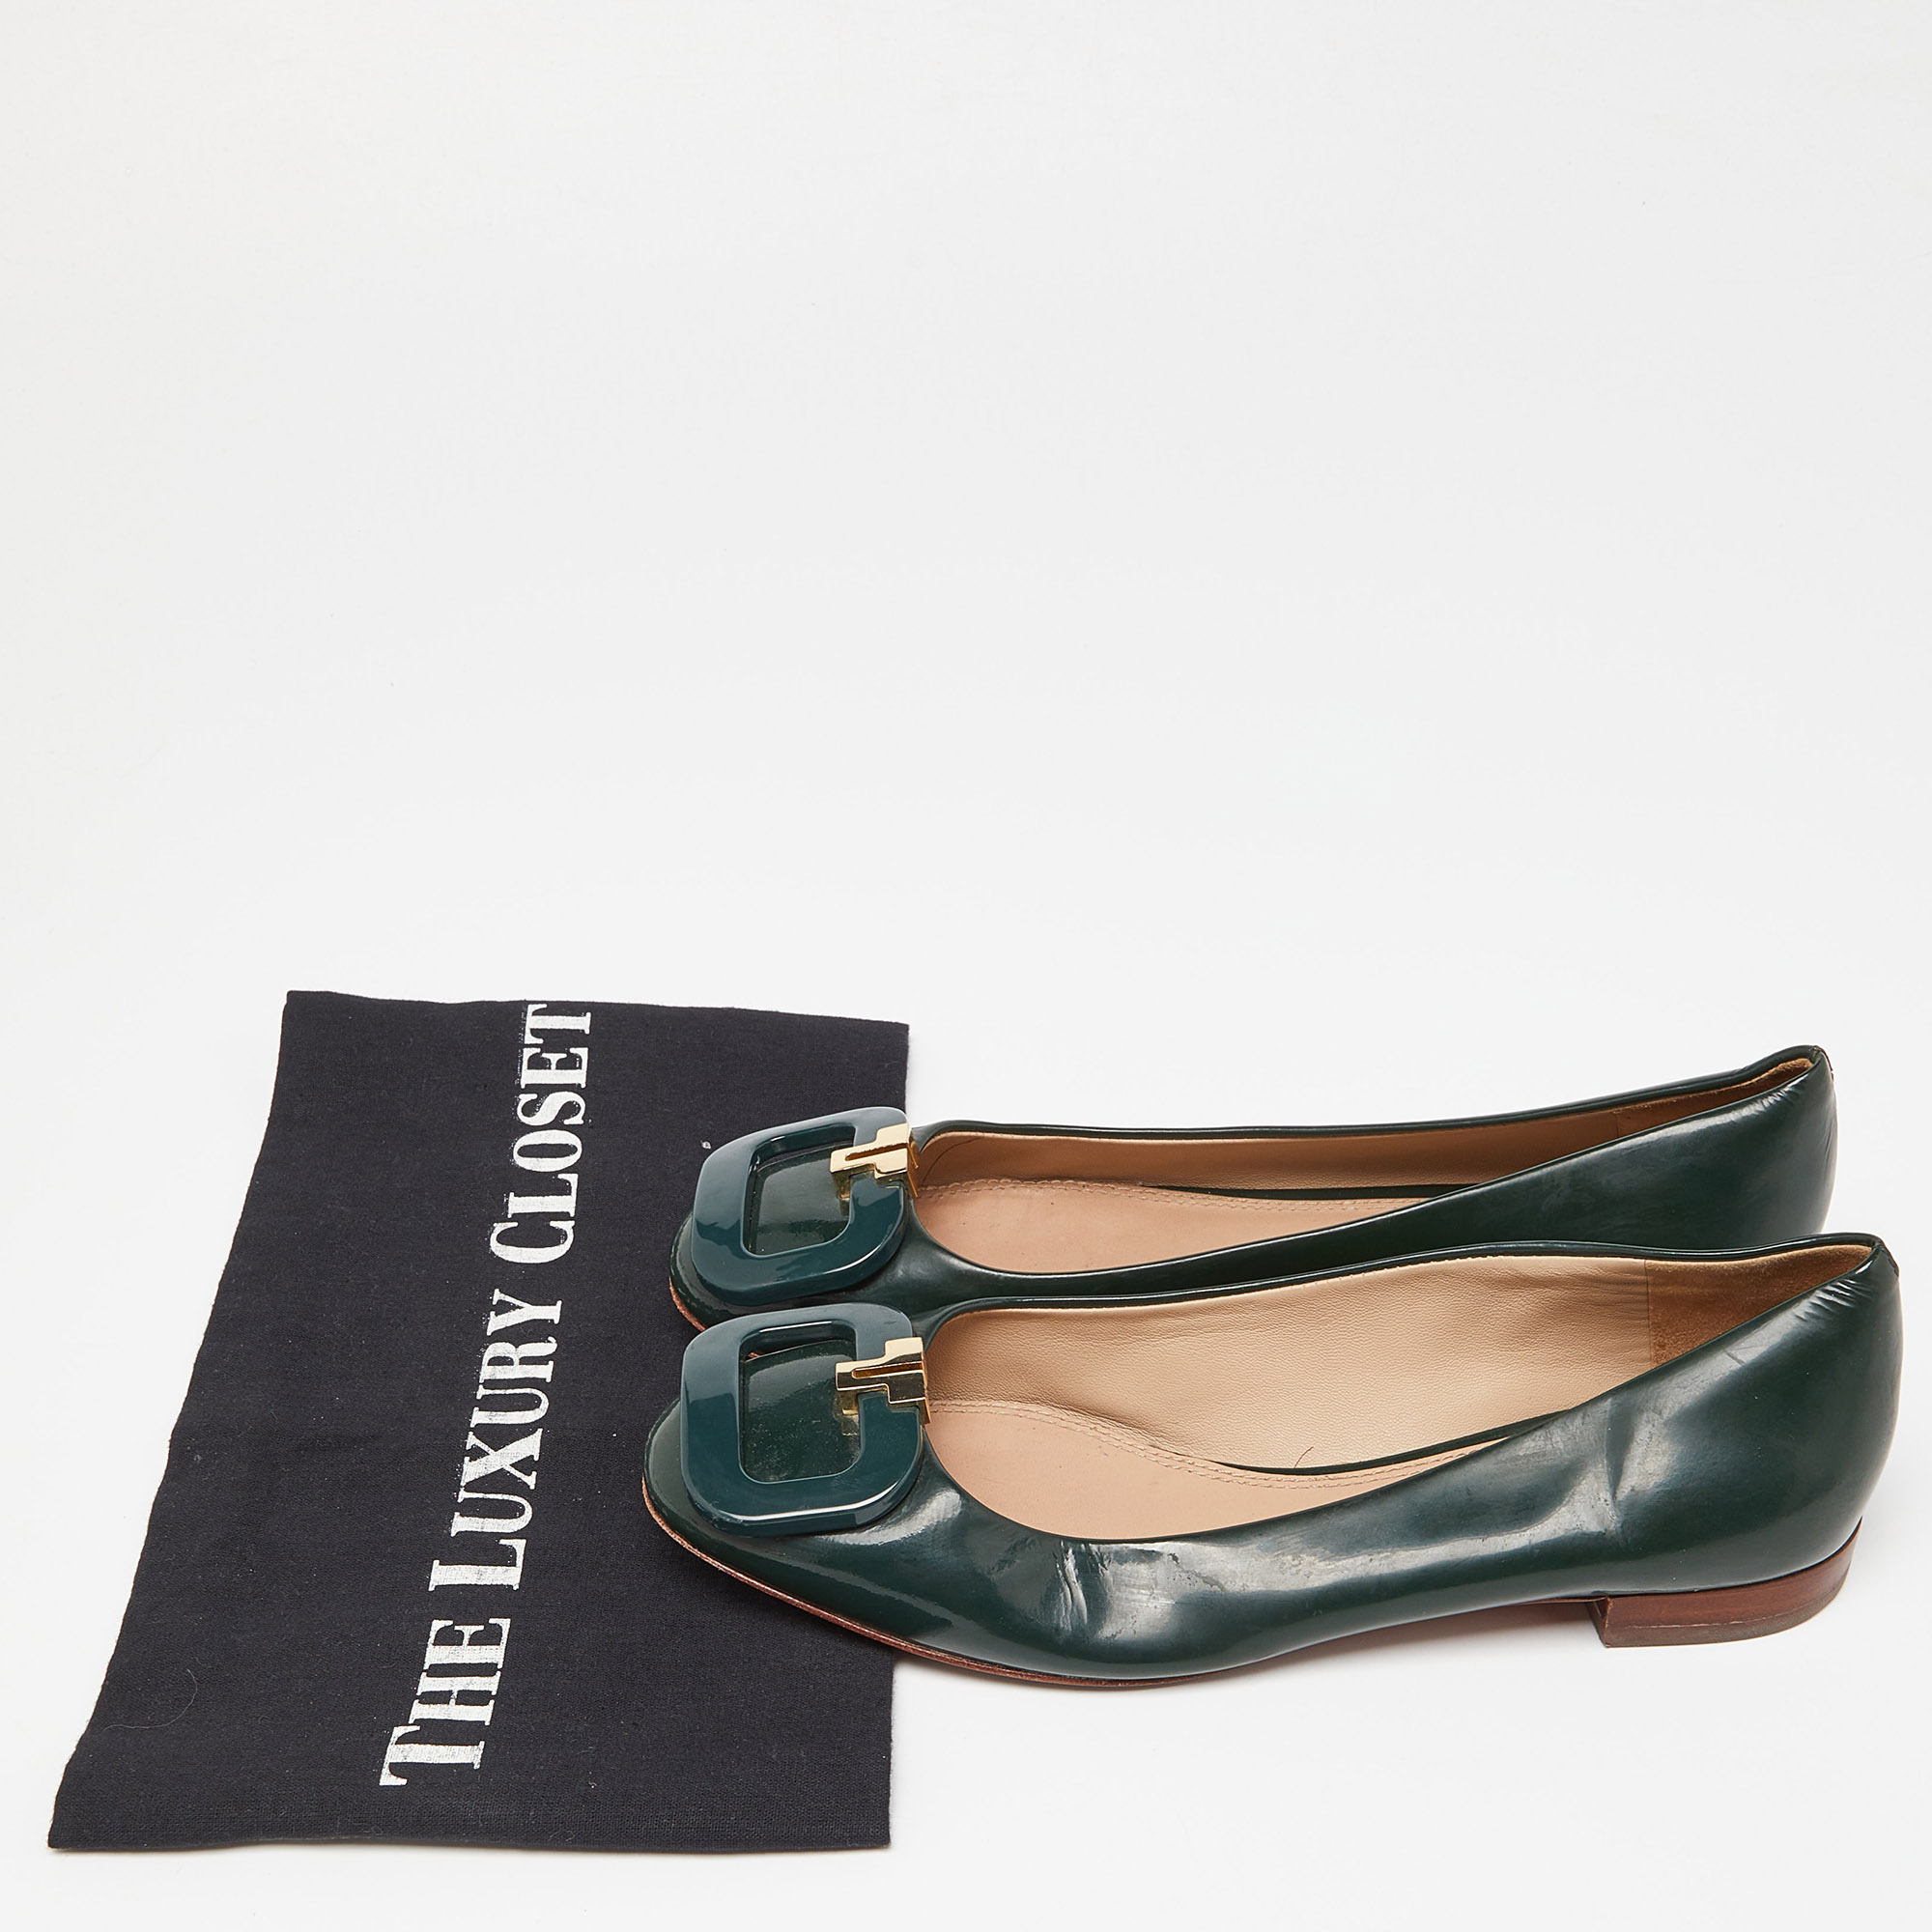 Tory Burch Green Patent Leather Ballet Flats Size 37